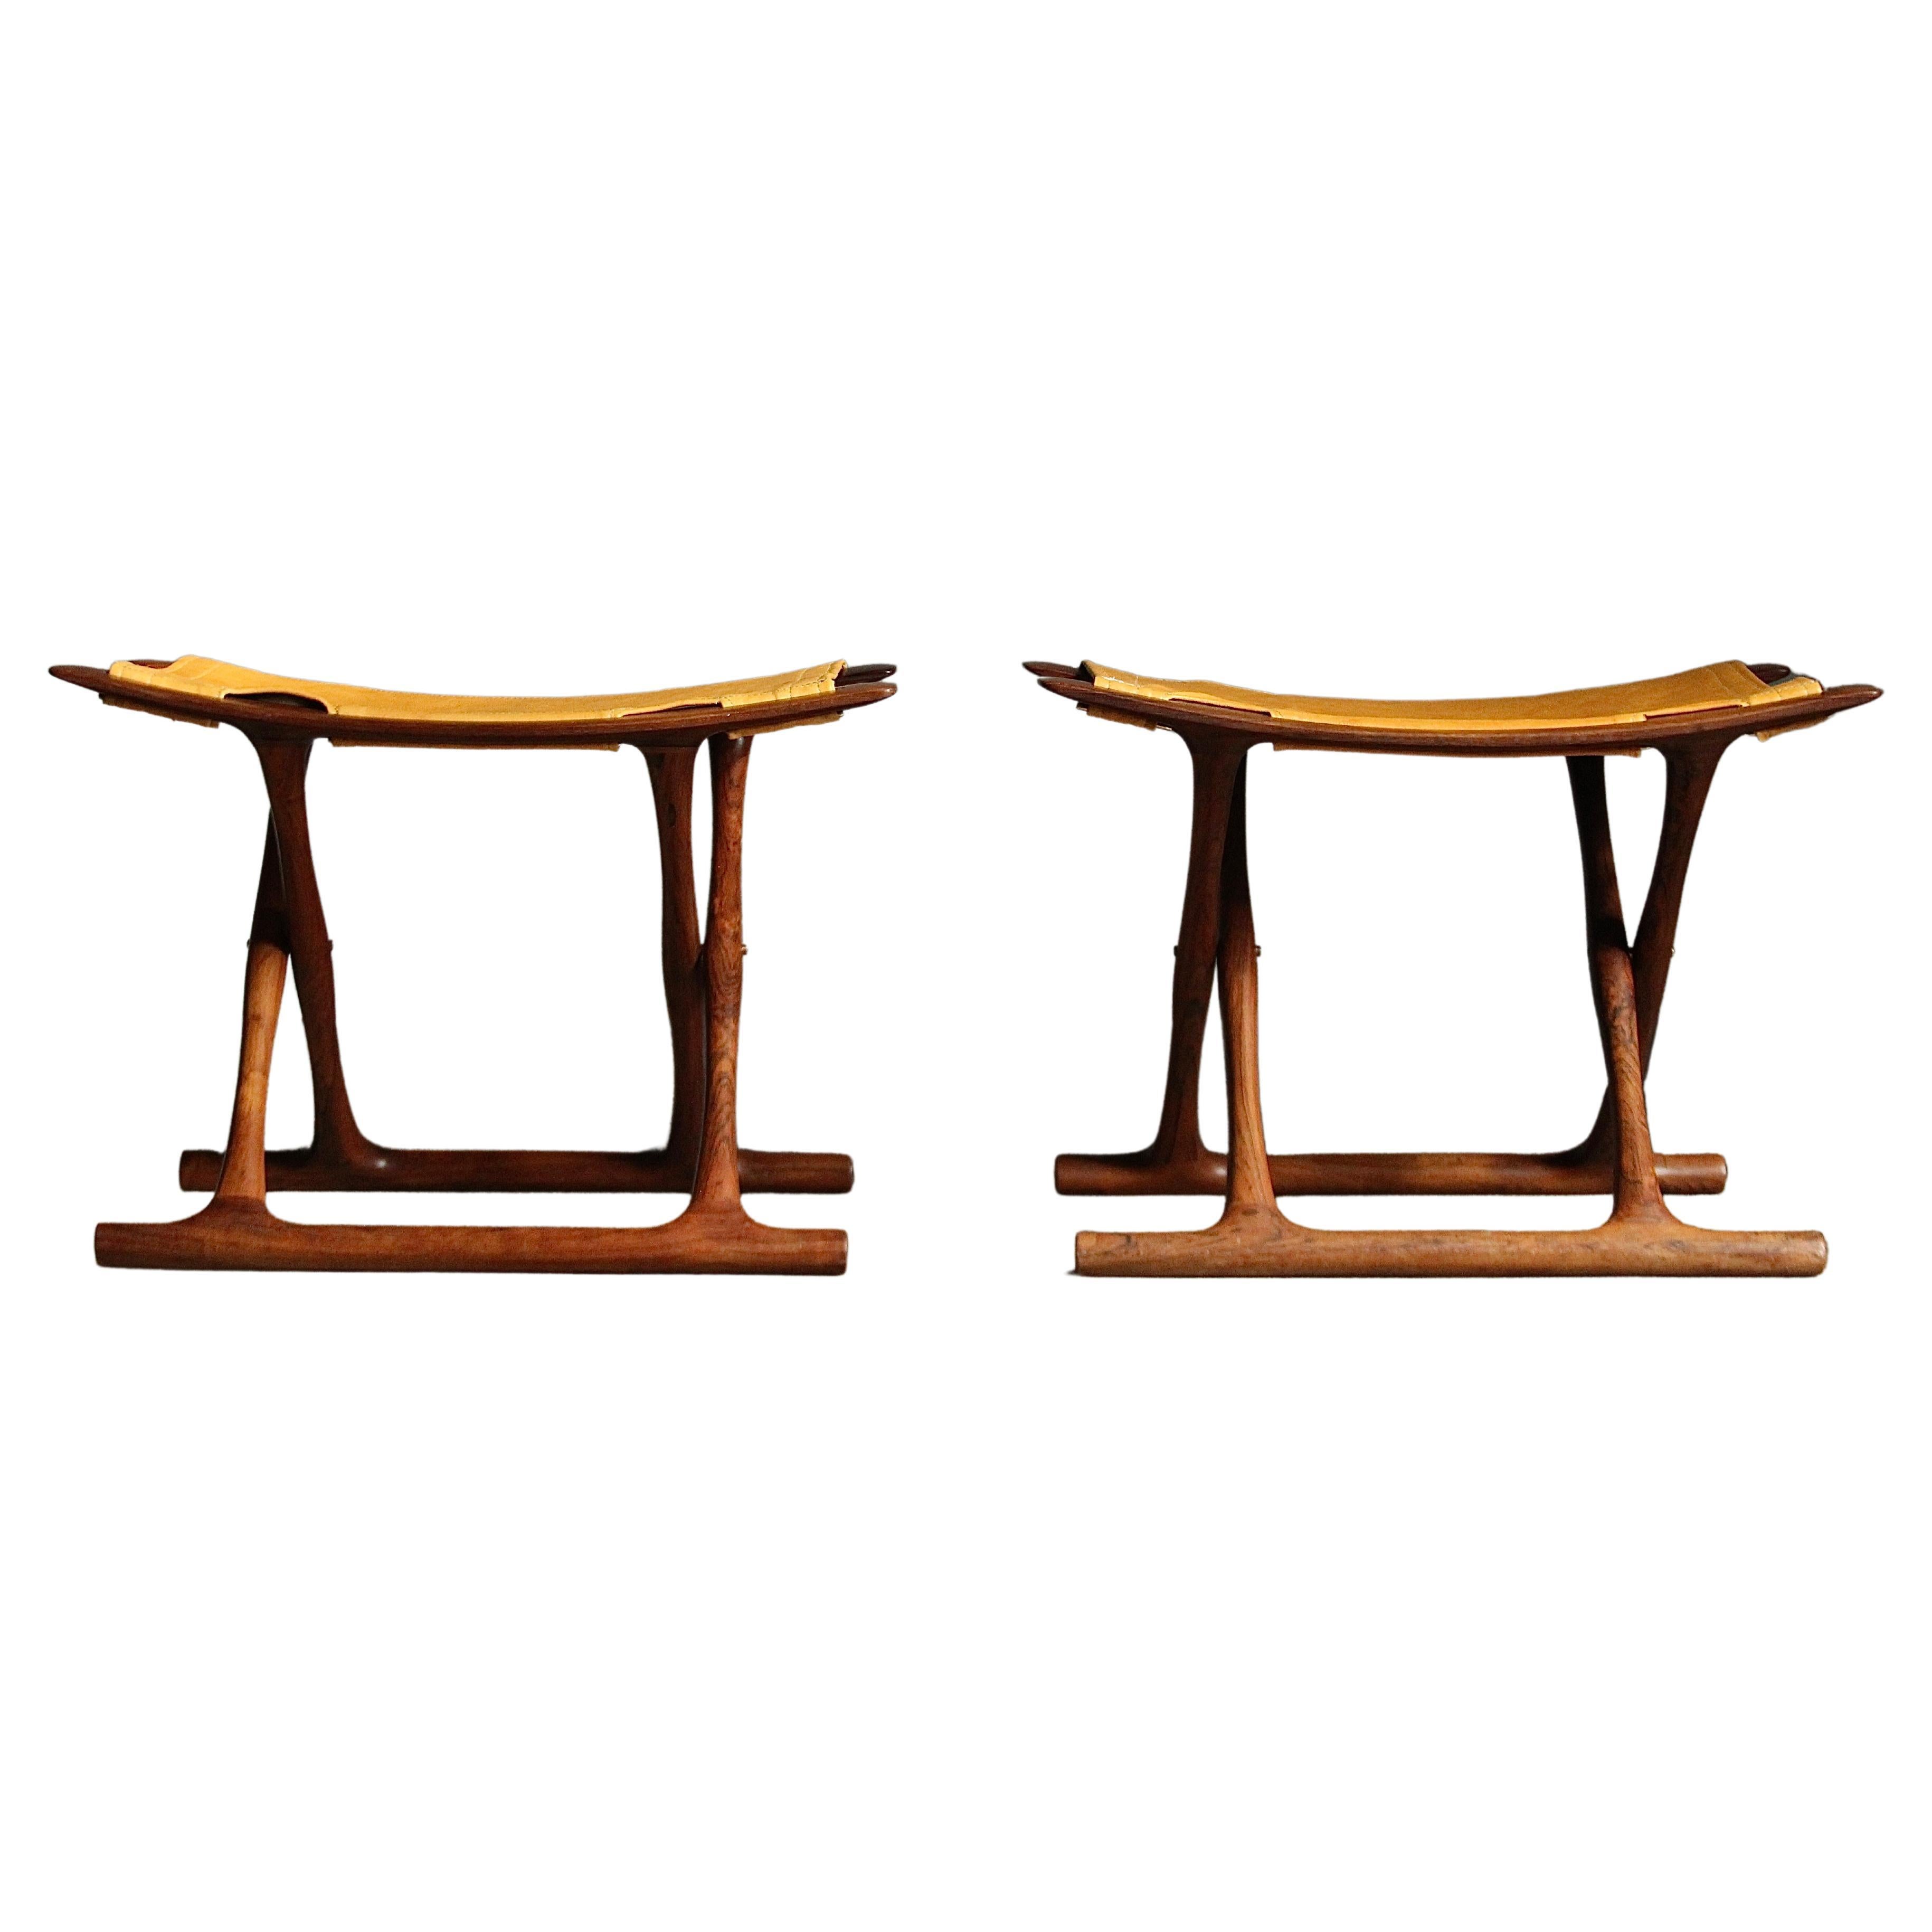 Ole Wanscher Rosewood and Goatskin "Egyptian" Stools for AJ Iversen, 1957 For Sale